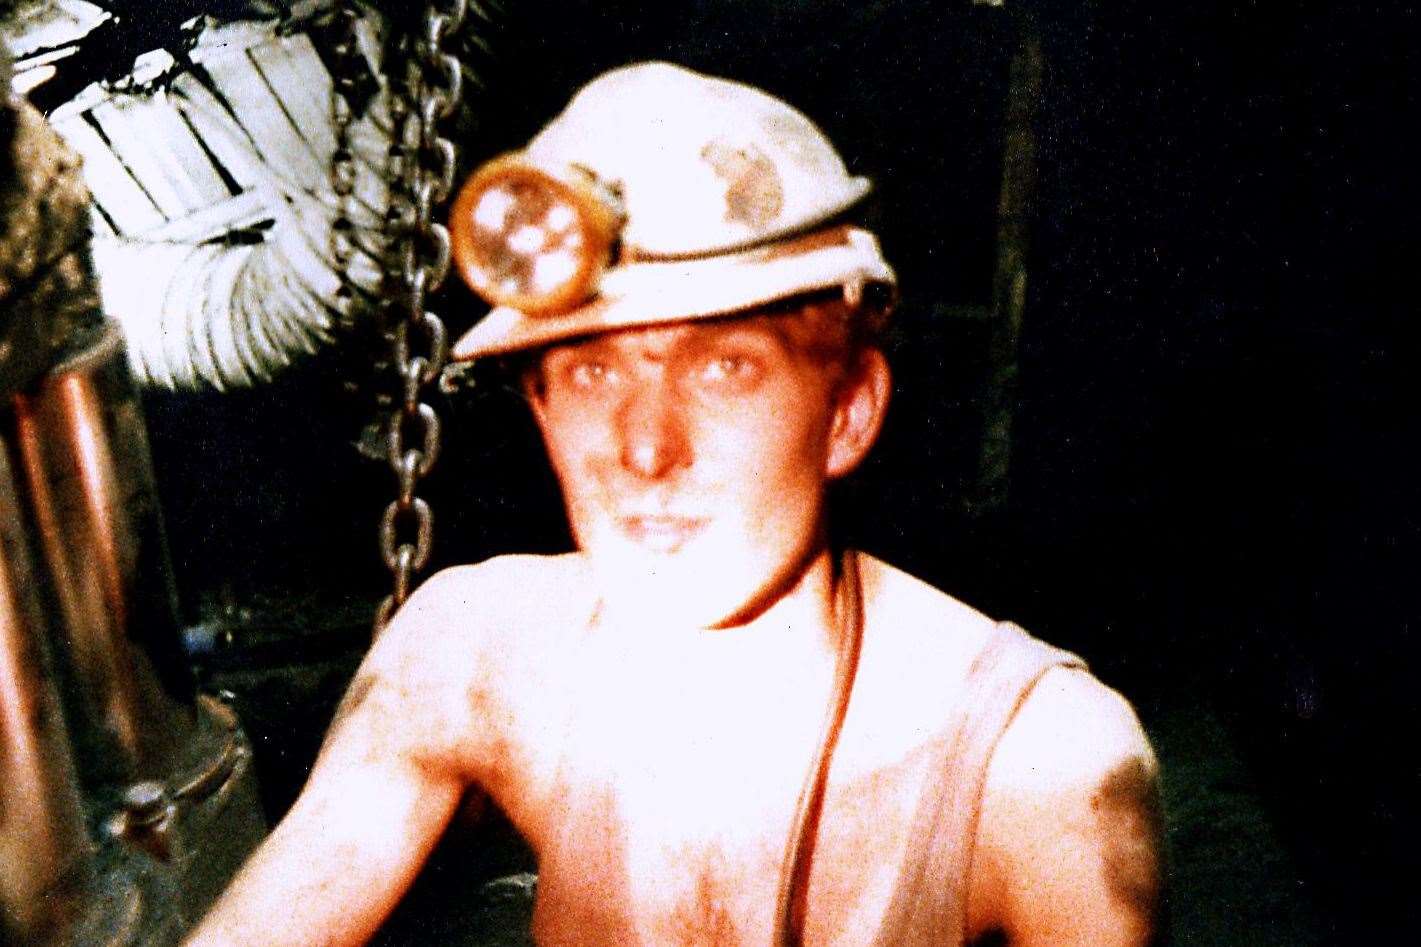 Shaun Parry as a young miner in the 1980s